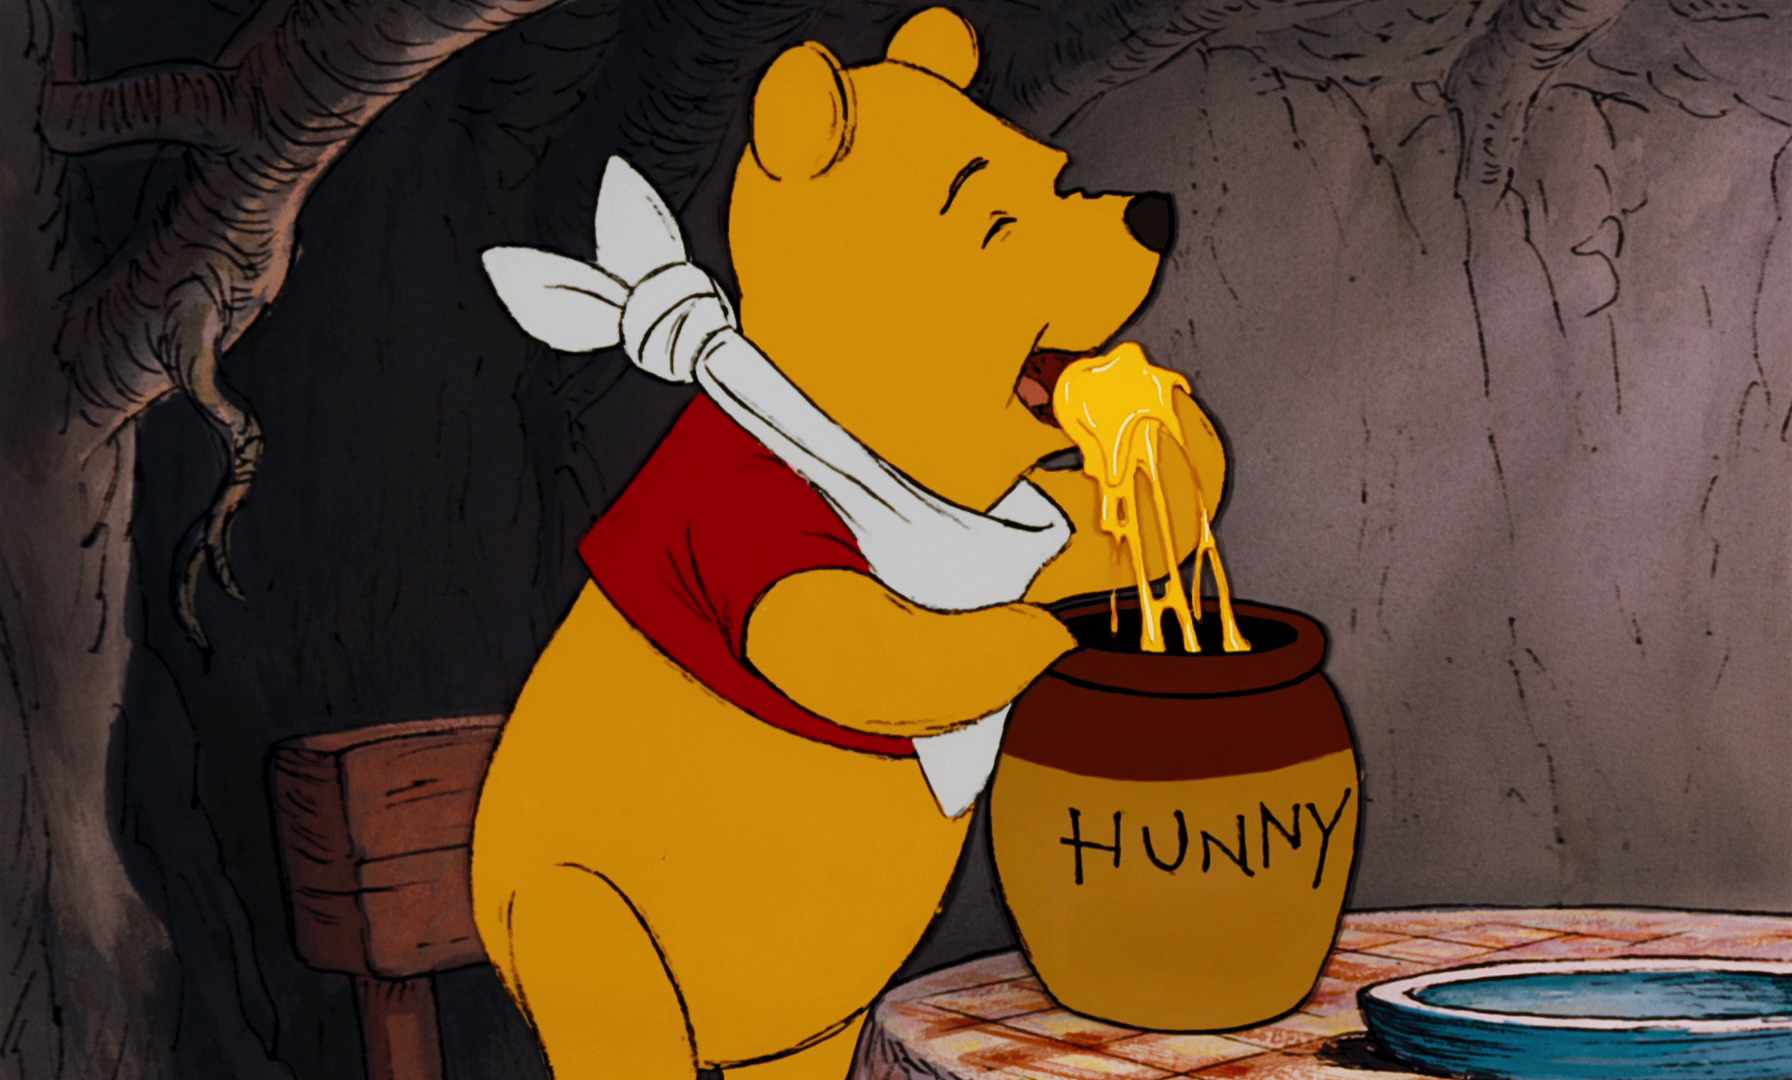 37 Mouth-Watering Foods From Cartoons We Wish Existed IRL1792 x 1080